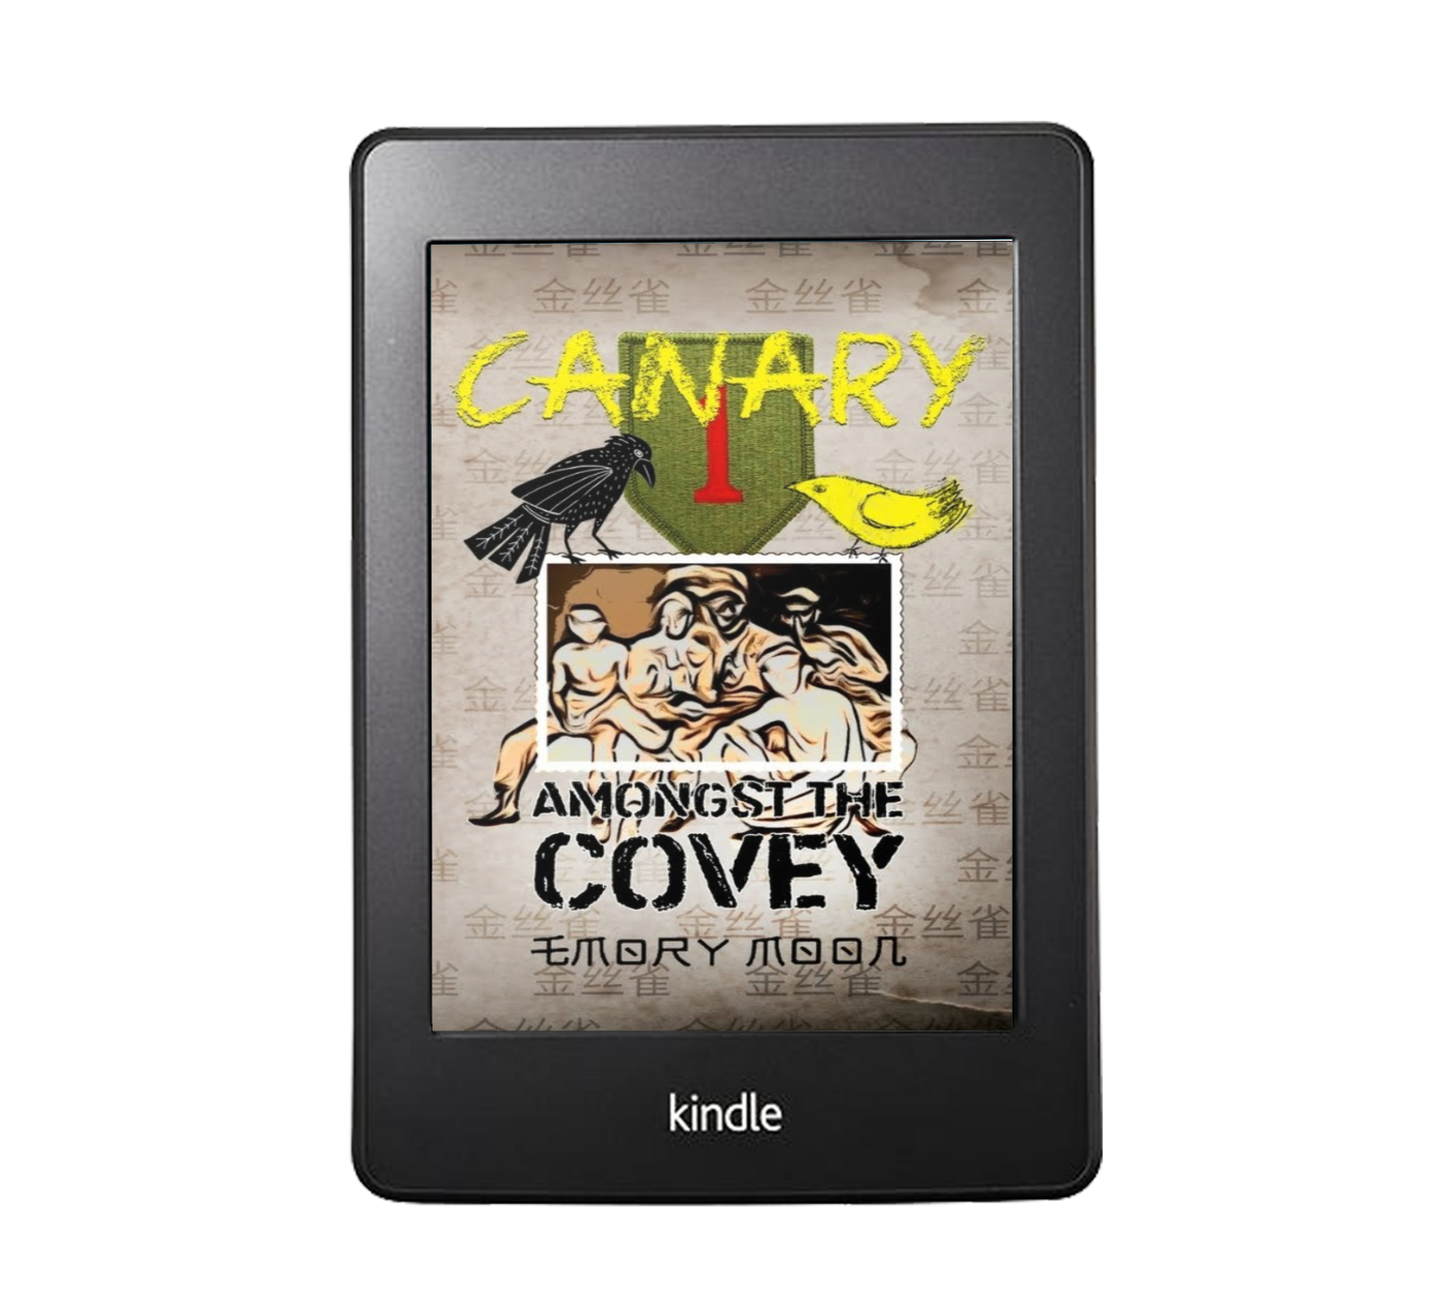 Canary Amongst the Covey - (ebook instant download) (Canary Trilogy Part-2) FREE after BUNDLE498 discount